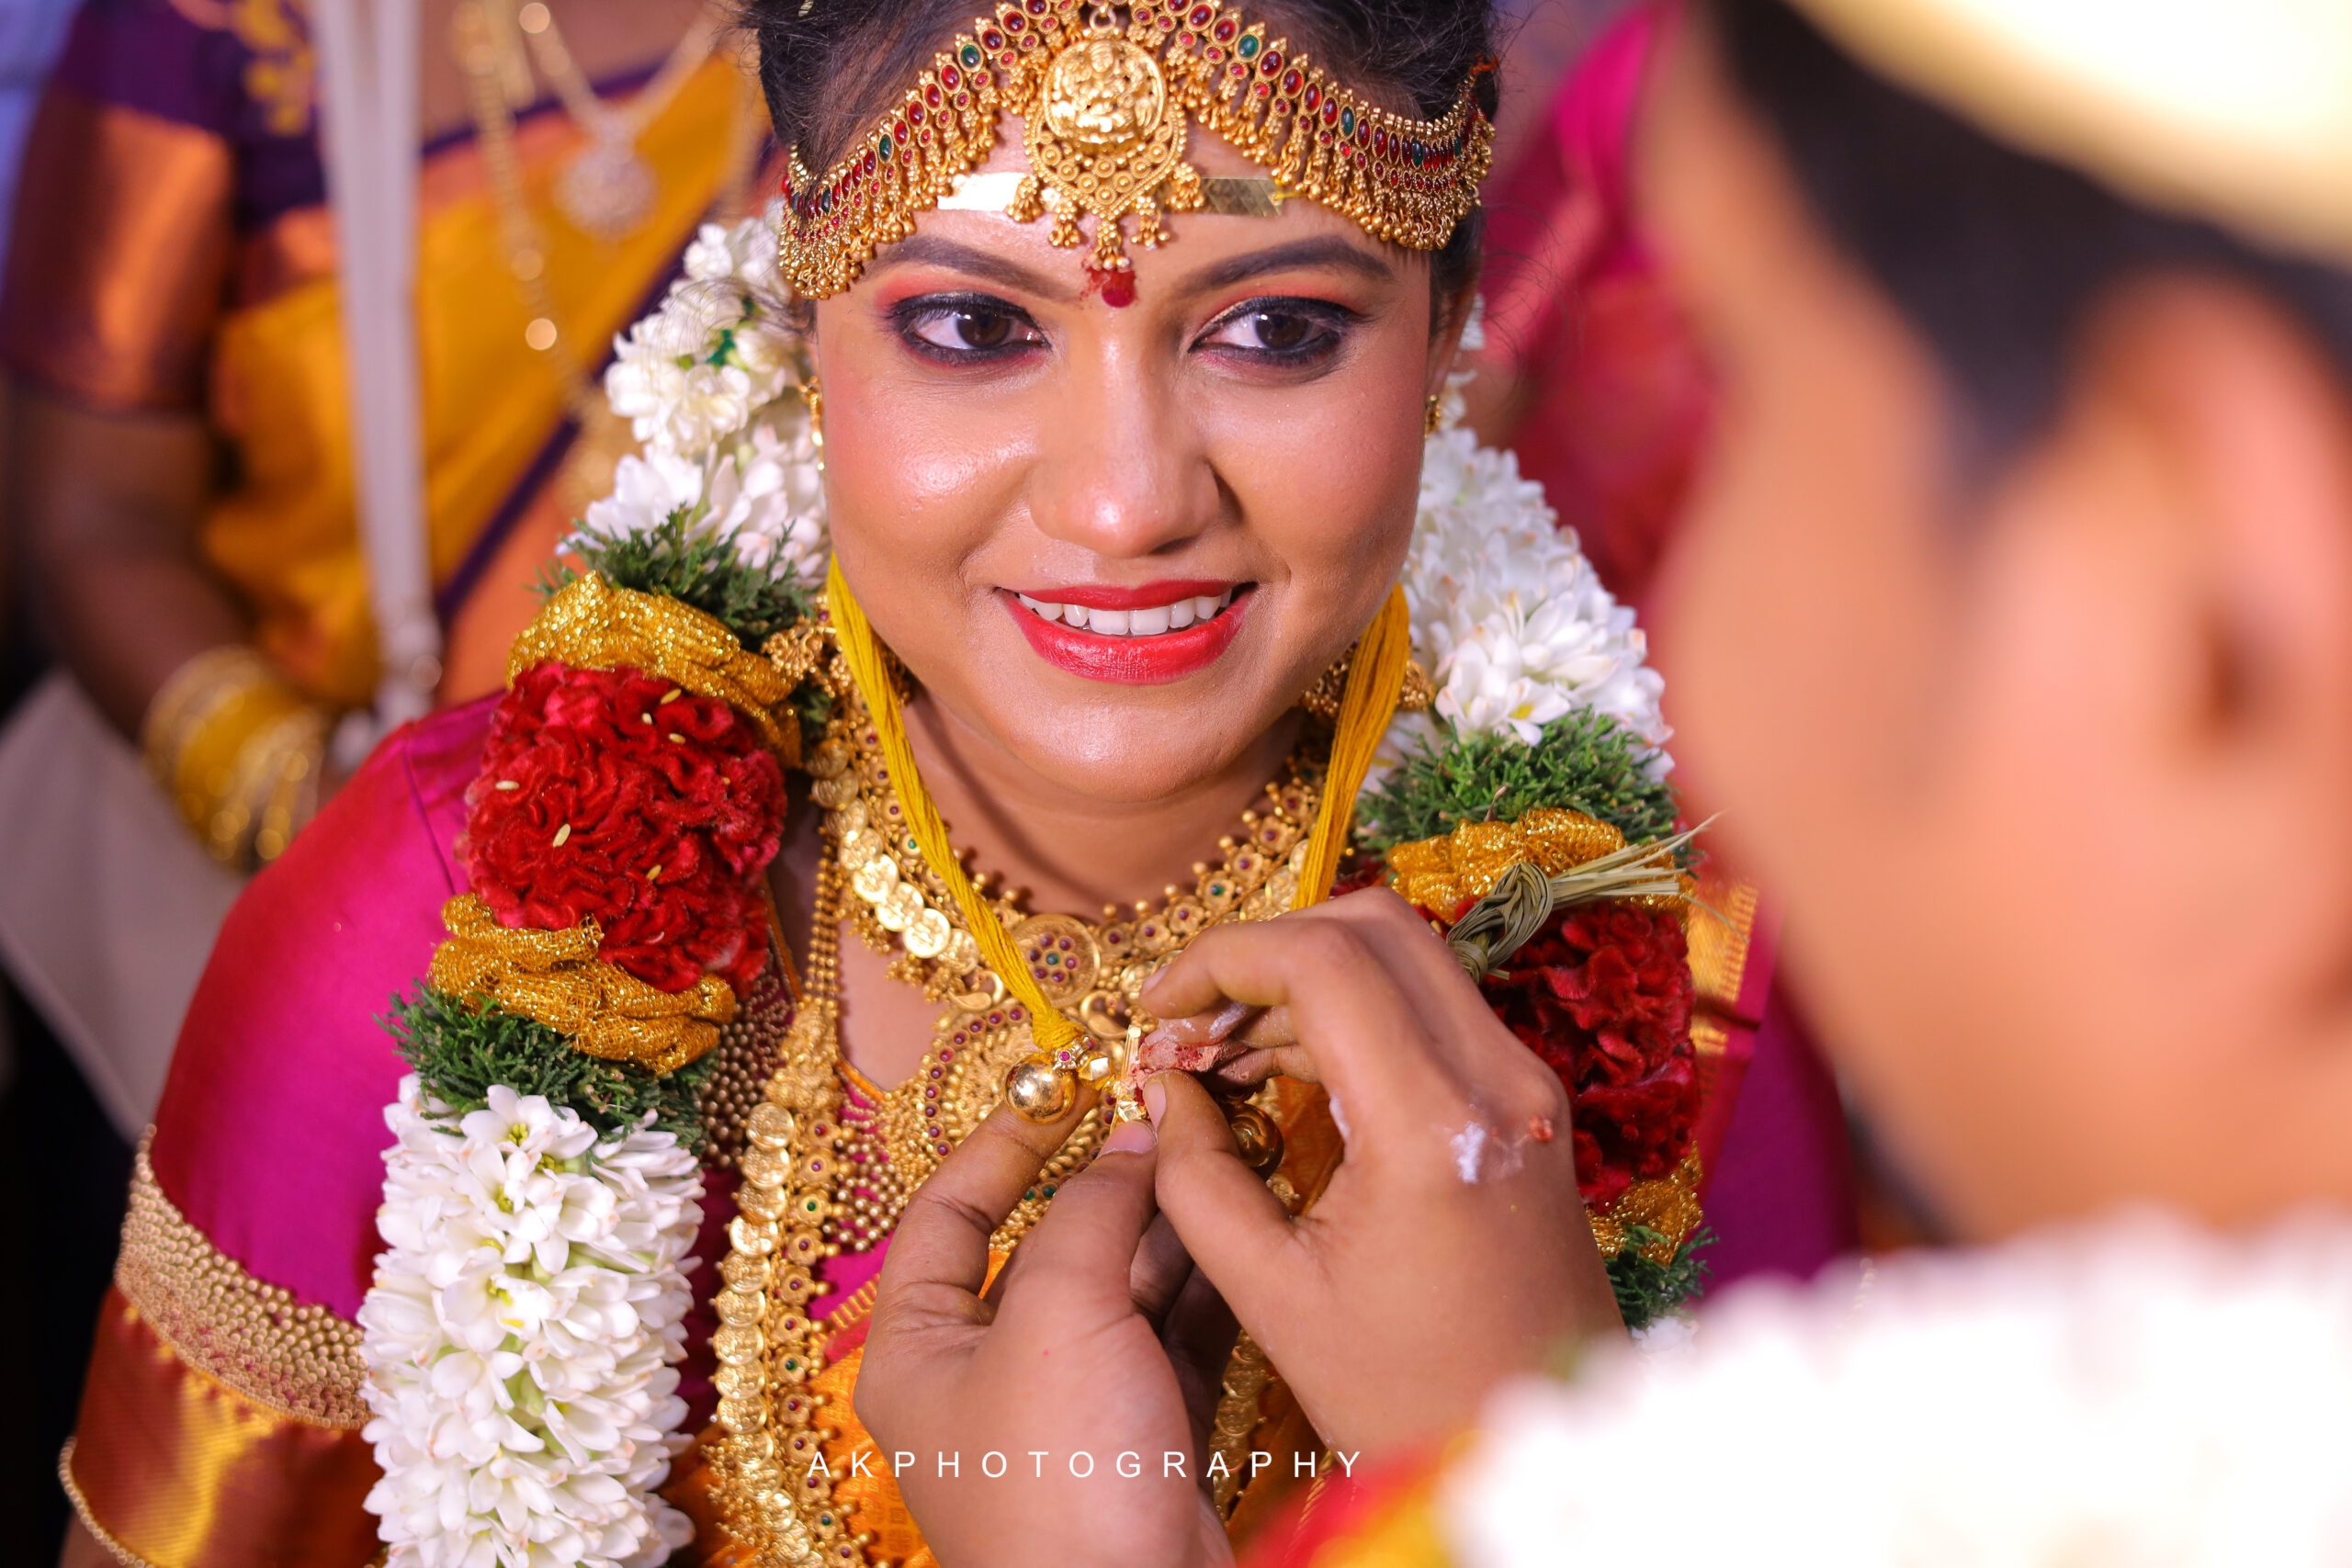 Trusted Wedding Photographers in Karur: Book Your Dream Experience with AK Photography